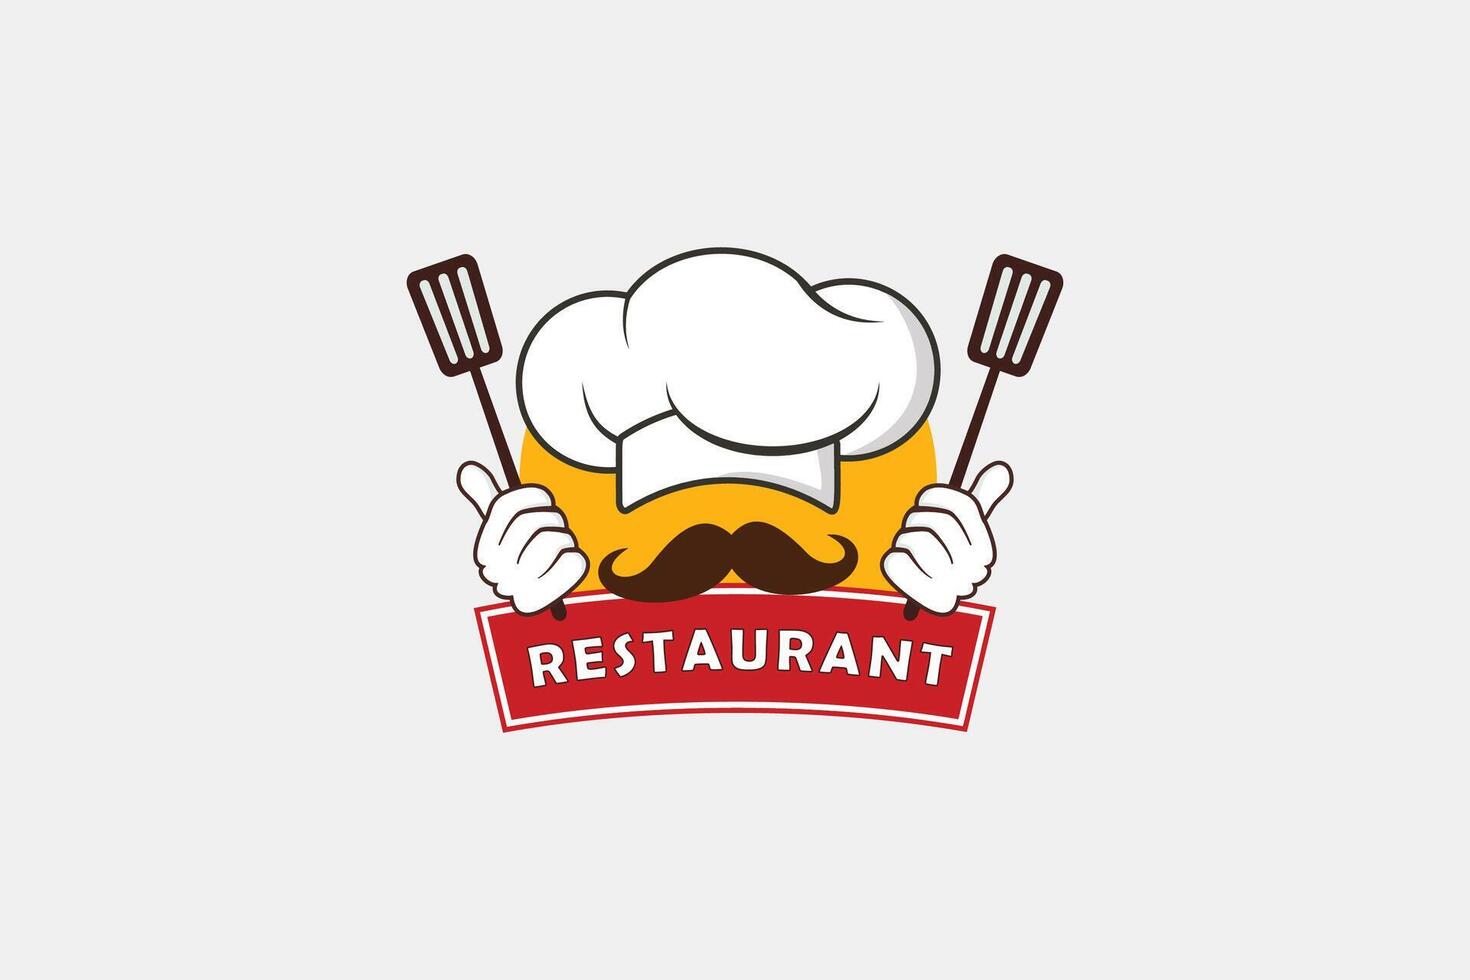 Restaurant logo and icon vector